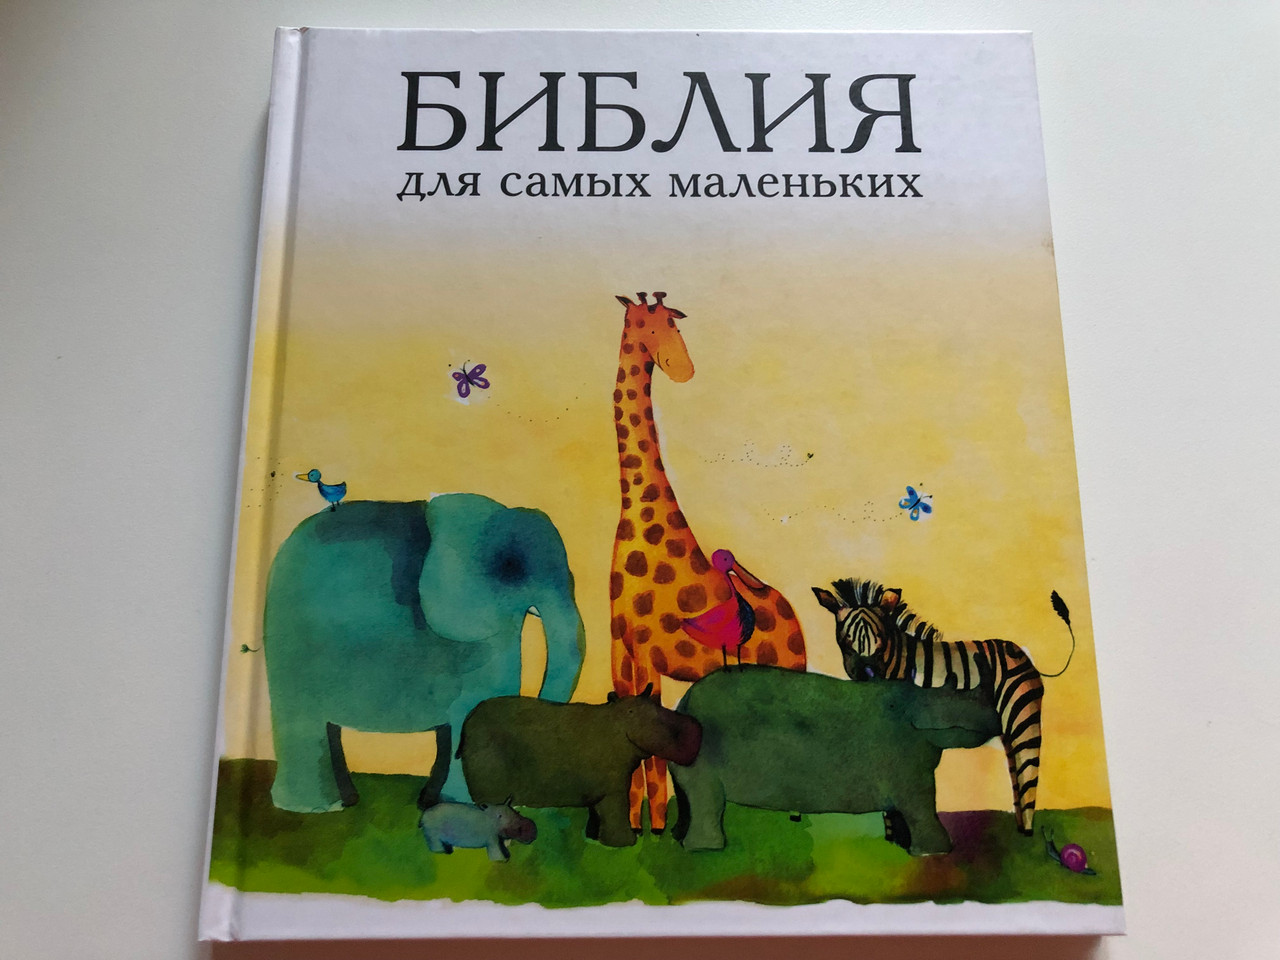 https://cdn10.bigcommerce.com/s-62bdpkt7pb/products/51169/images/260516/Russian_edition_of_A_Childs_Bible_1__34912.1670699381.1280.1280.JPG?c=2